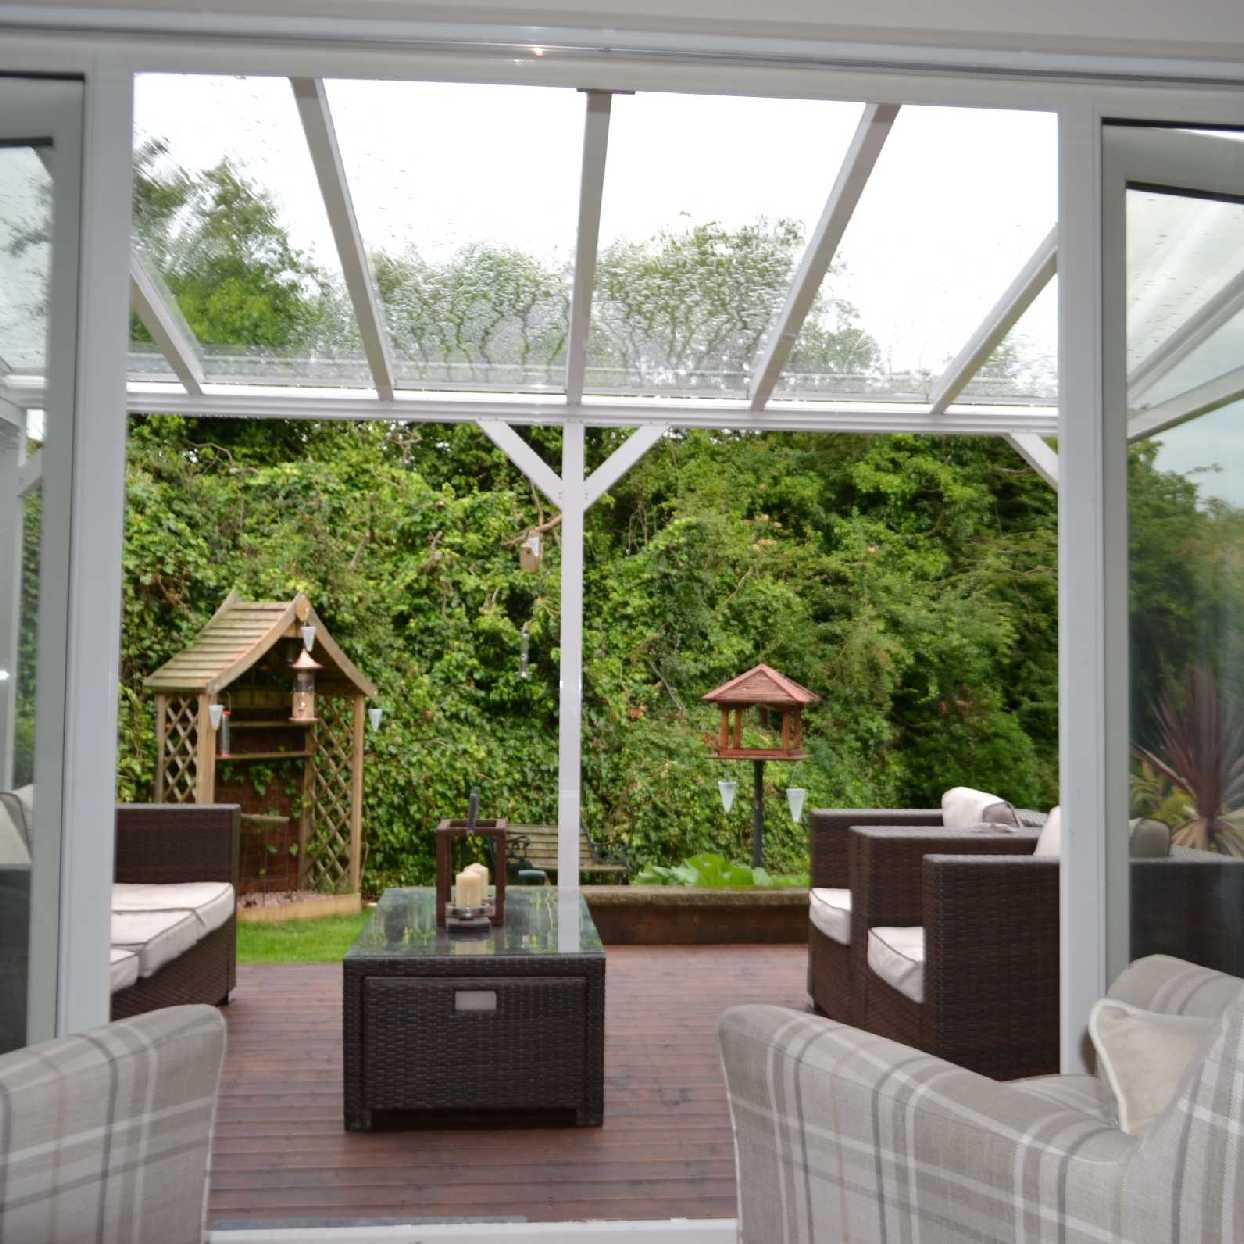 Great selection of Omega Smart Lean-To Canopy, White UNGLAZED for 6mm Glazing - 9.8m (W) x 2.0m (P), (5) Supporting Posts